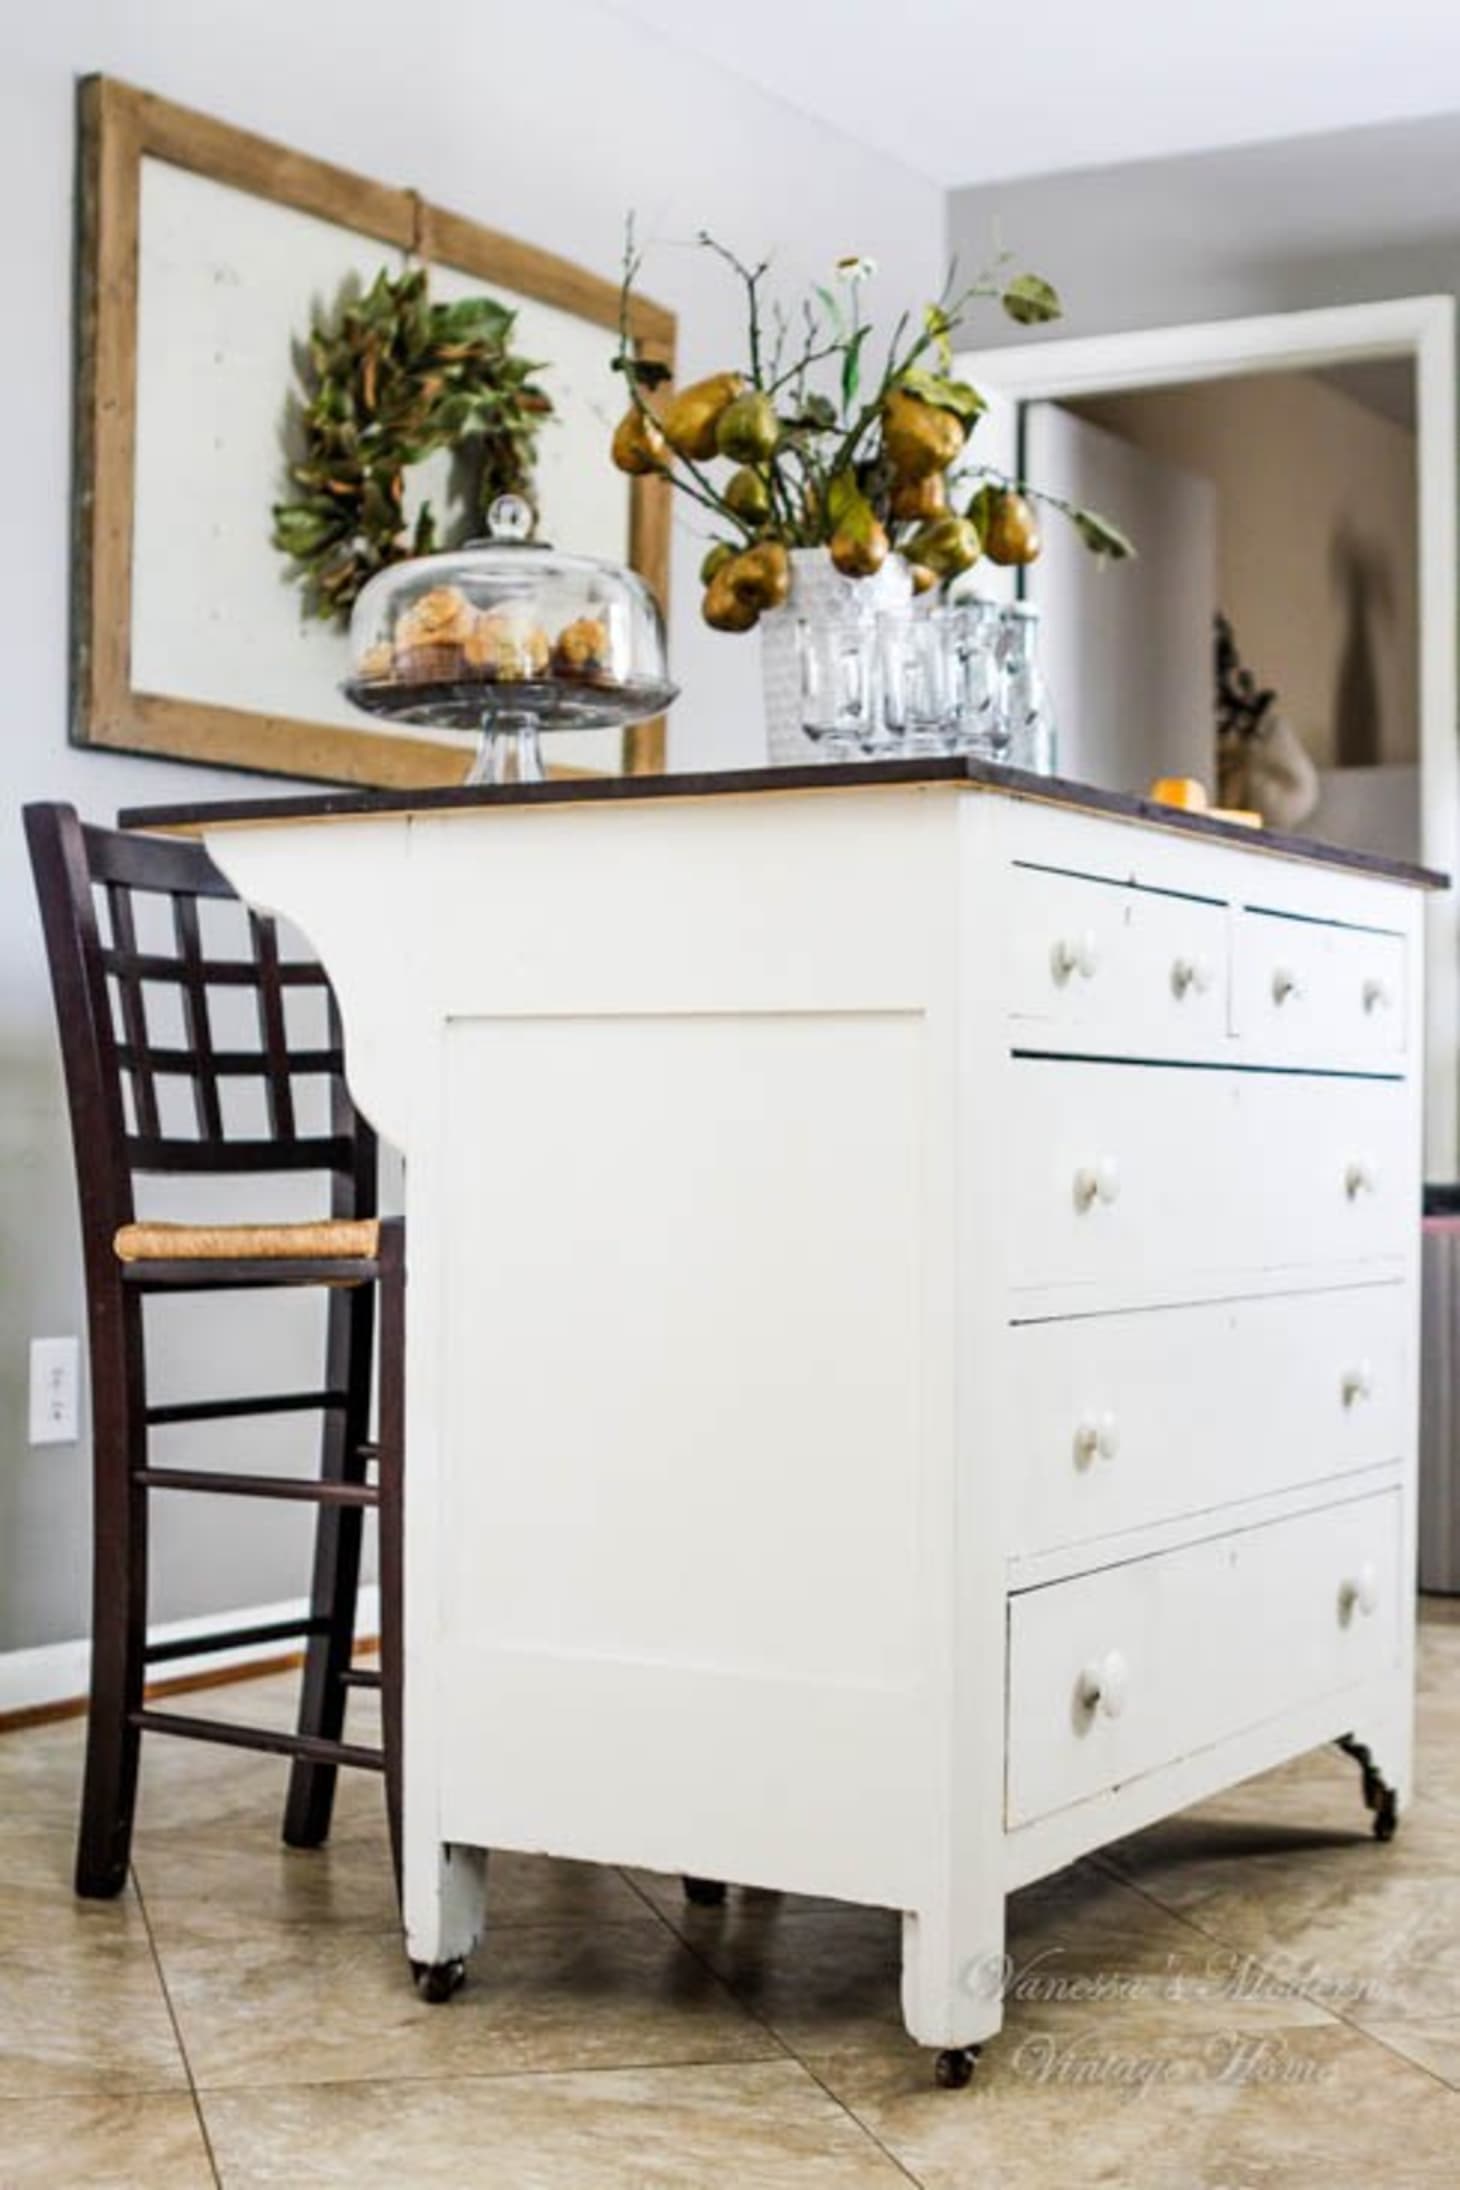 7 Ways To Repurpose A Vintage Dresser And Gain More Storage In